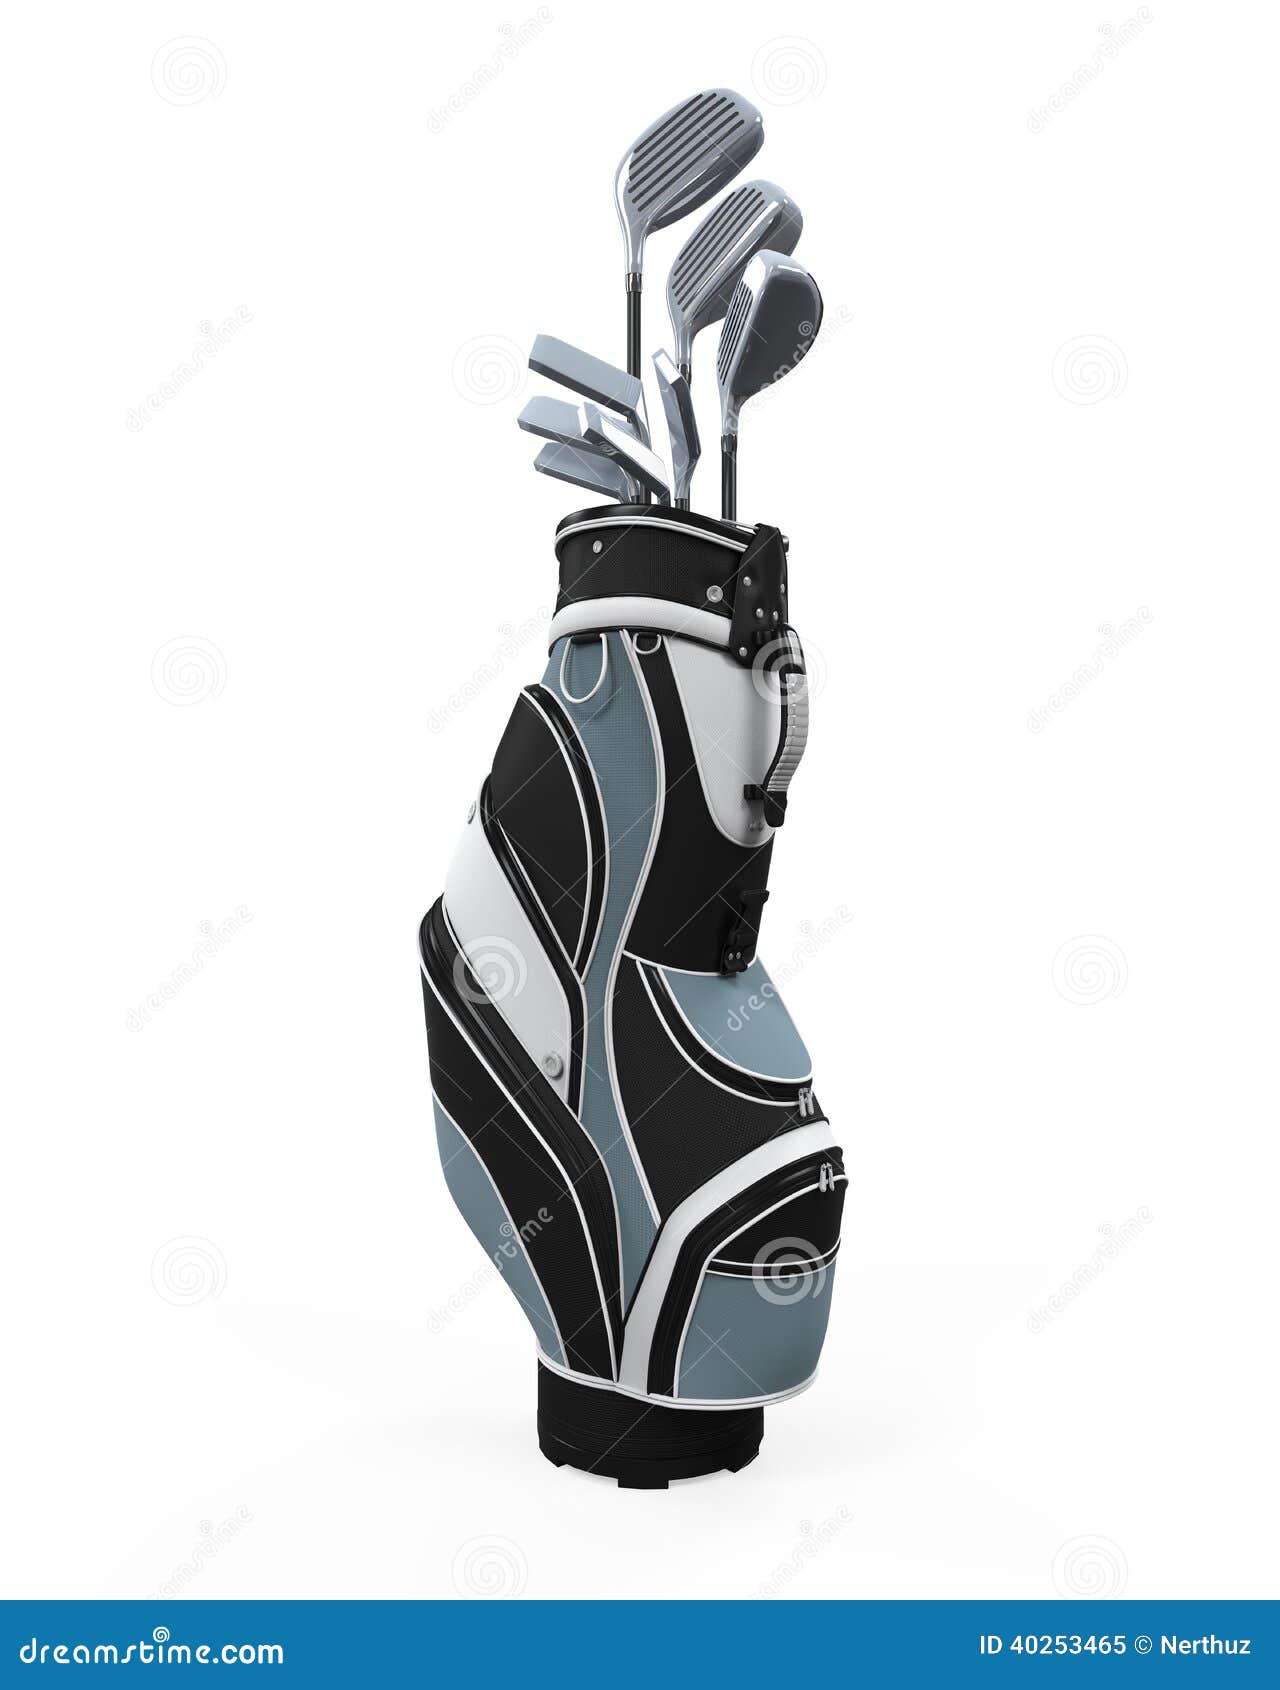 clipart golf clubs and bag - photo #32